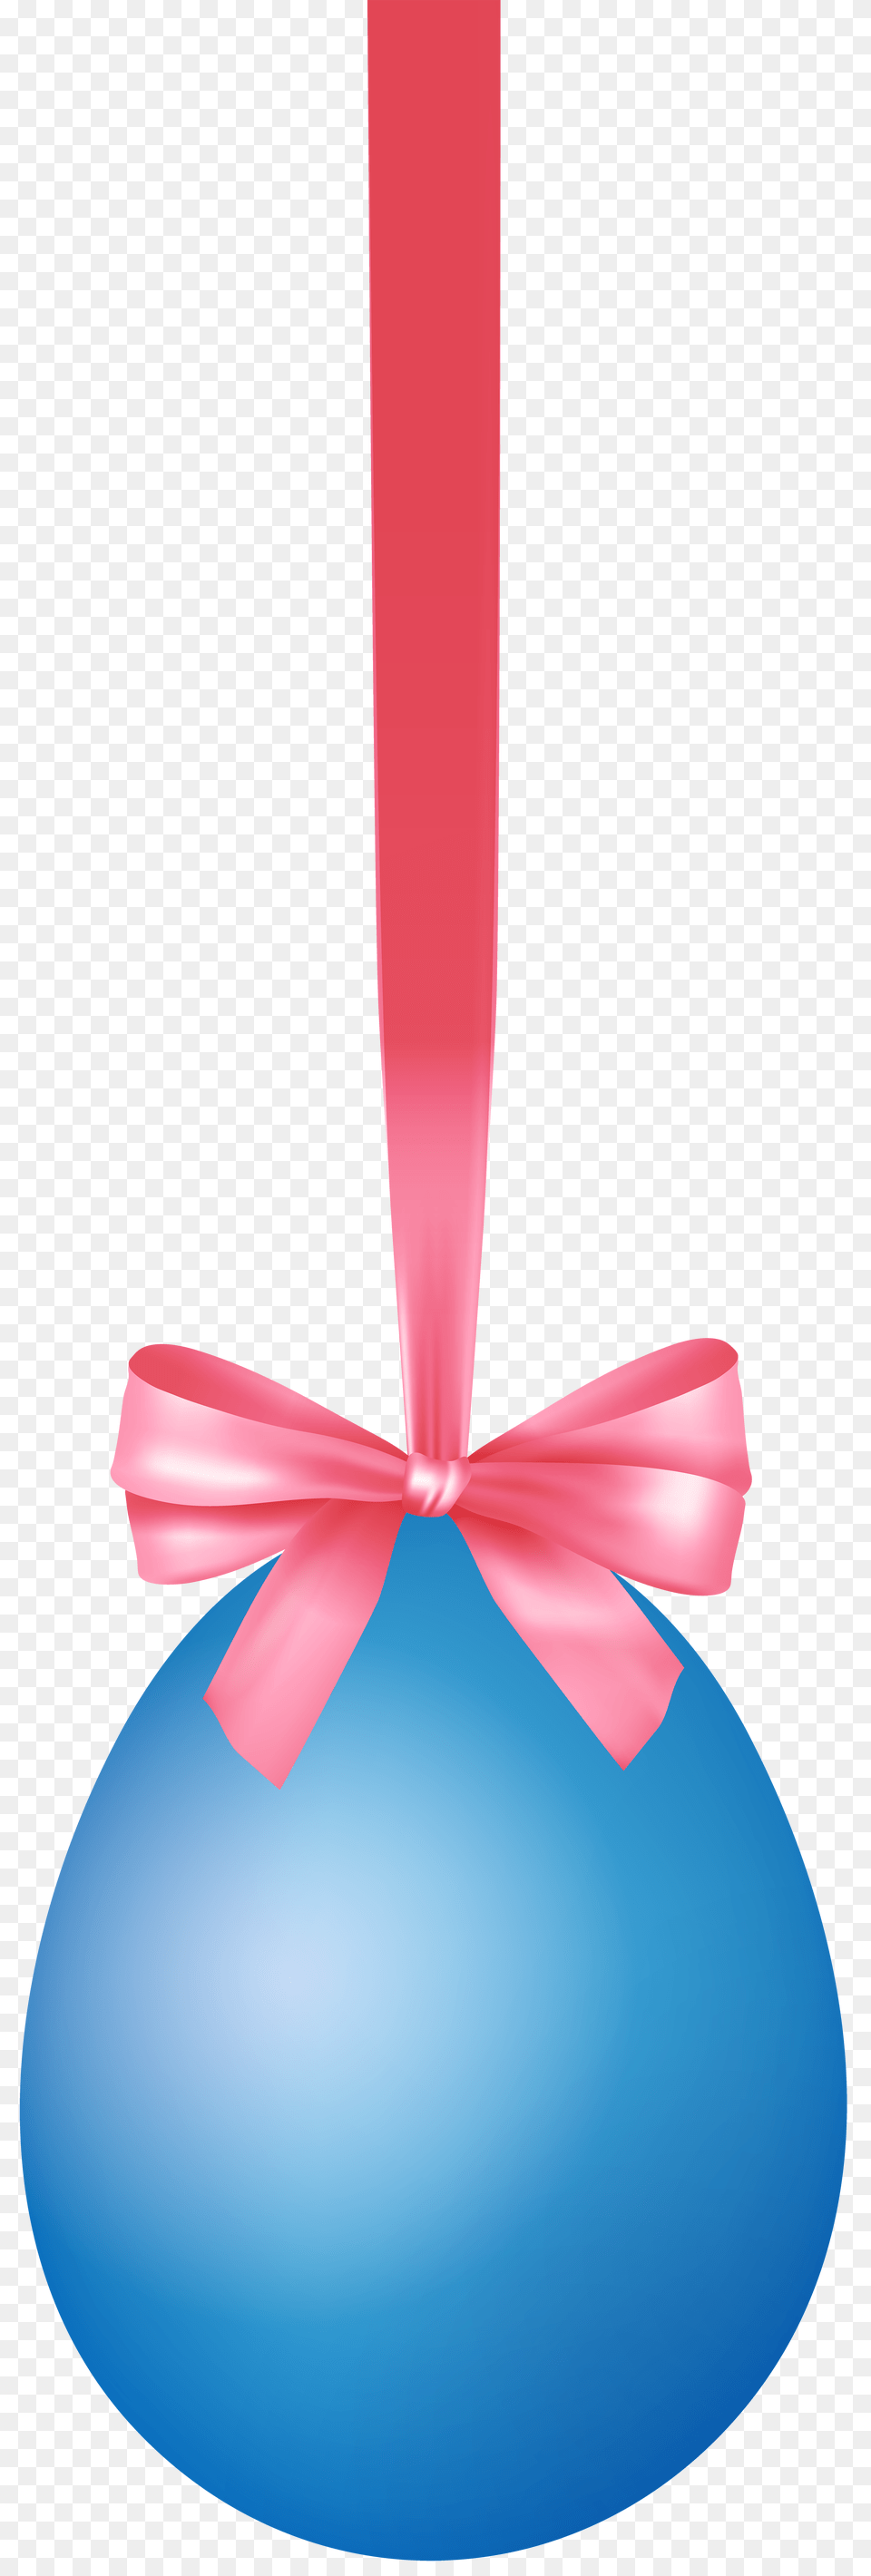 Blue Hanging Easter Egg With Bow Clip Art, Balloon, Chandelier, Lamp Free Transparent Png